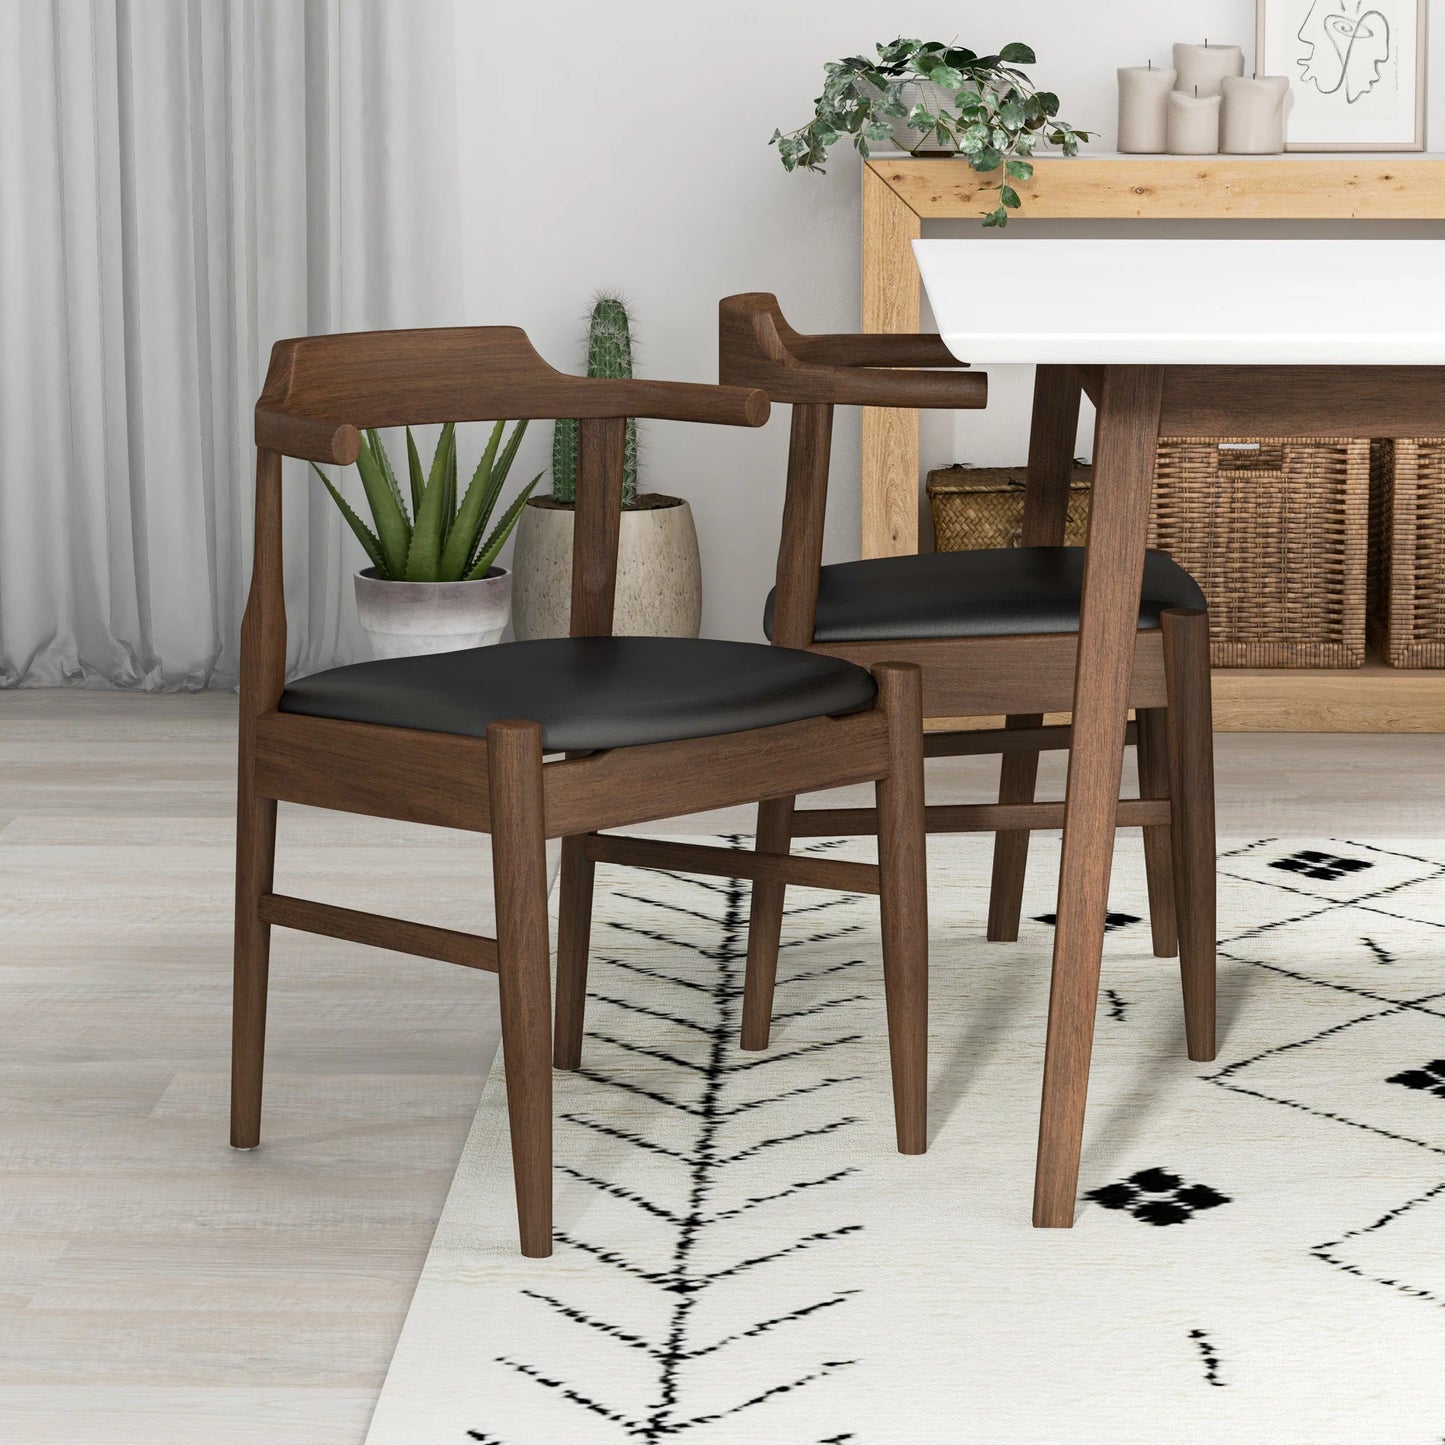 Adira (Small - White) Dining Set with 4 Zola (Black Leather) Dining Chairs